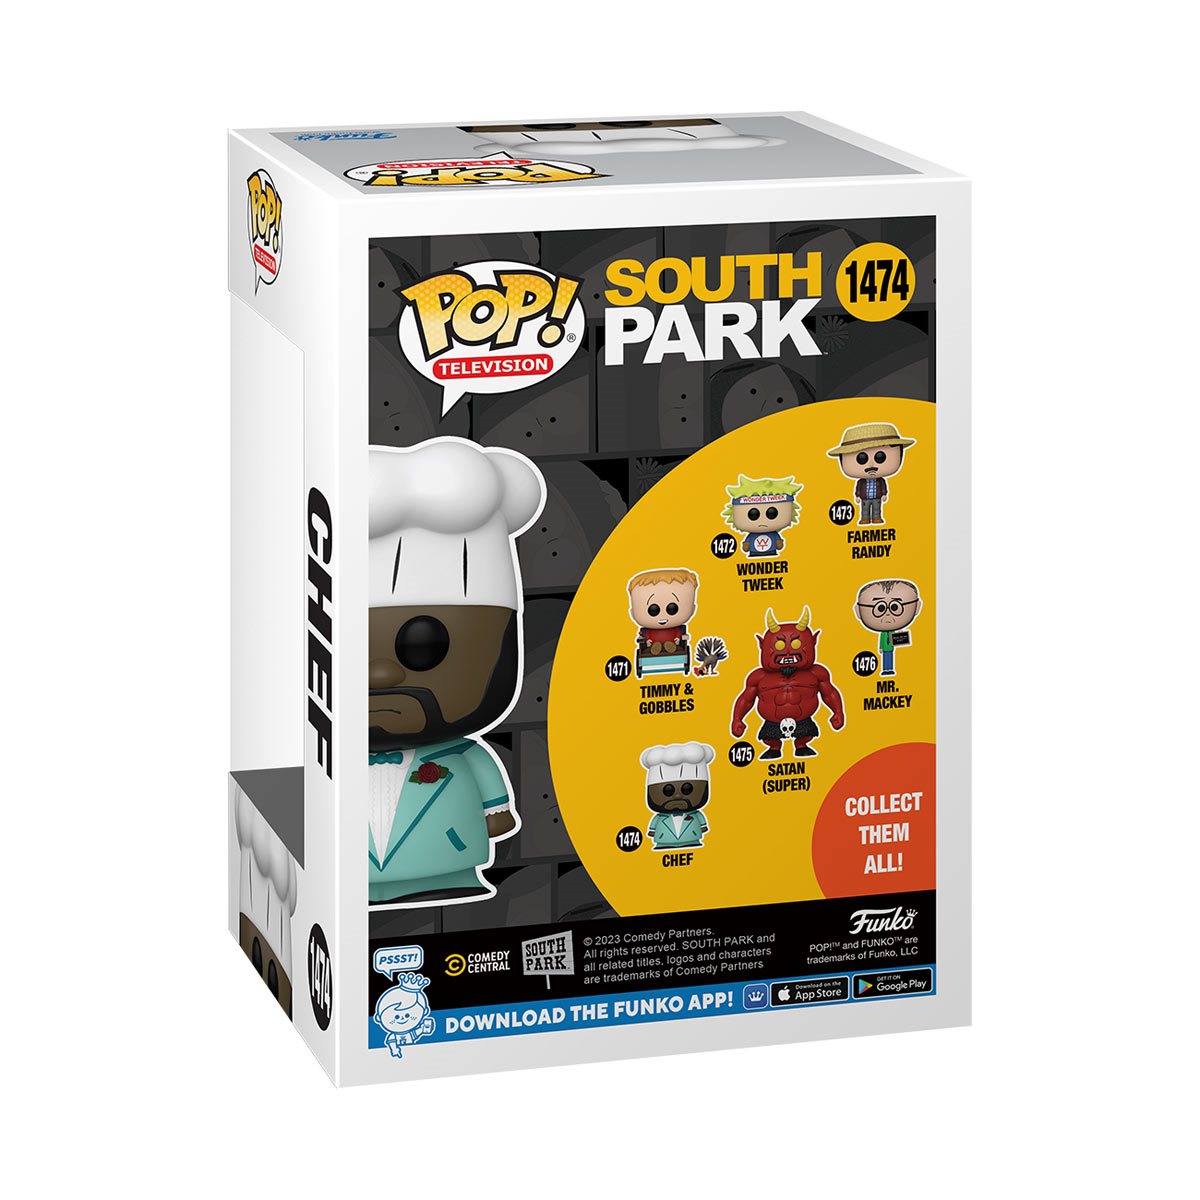 Funko Pop! South Park - Chef in Suit